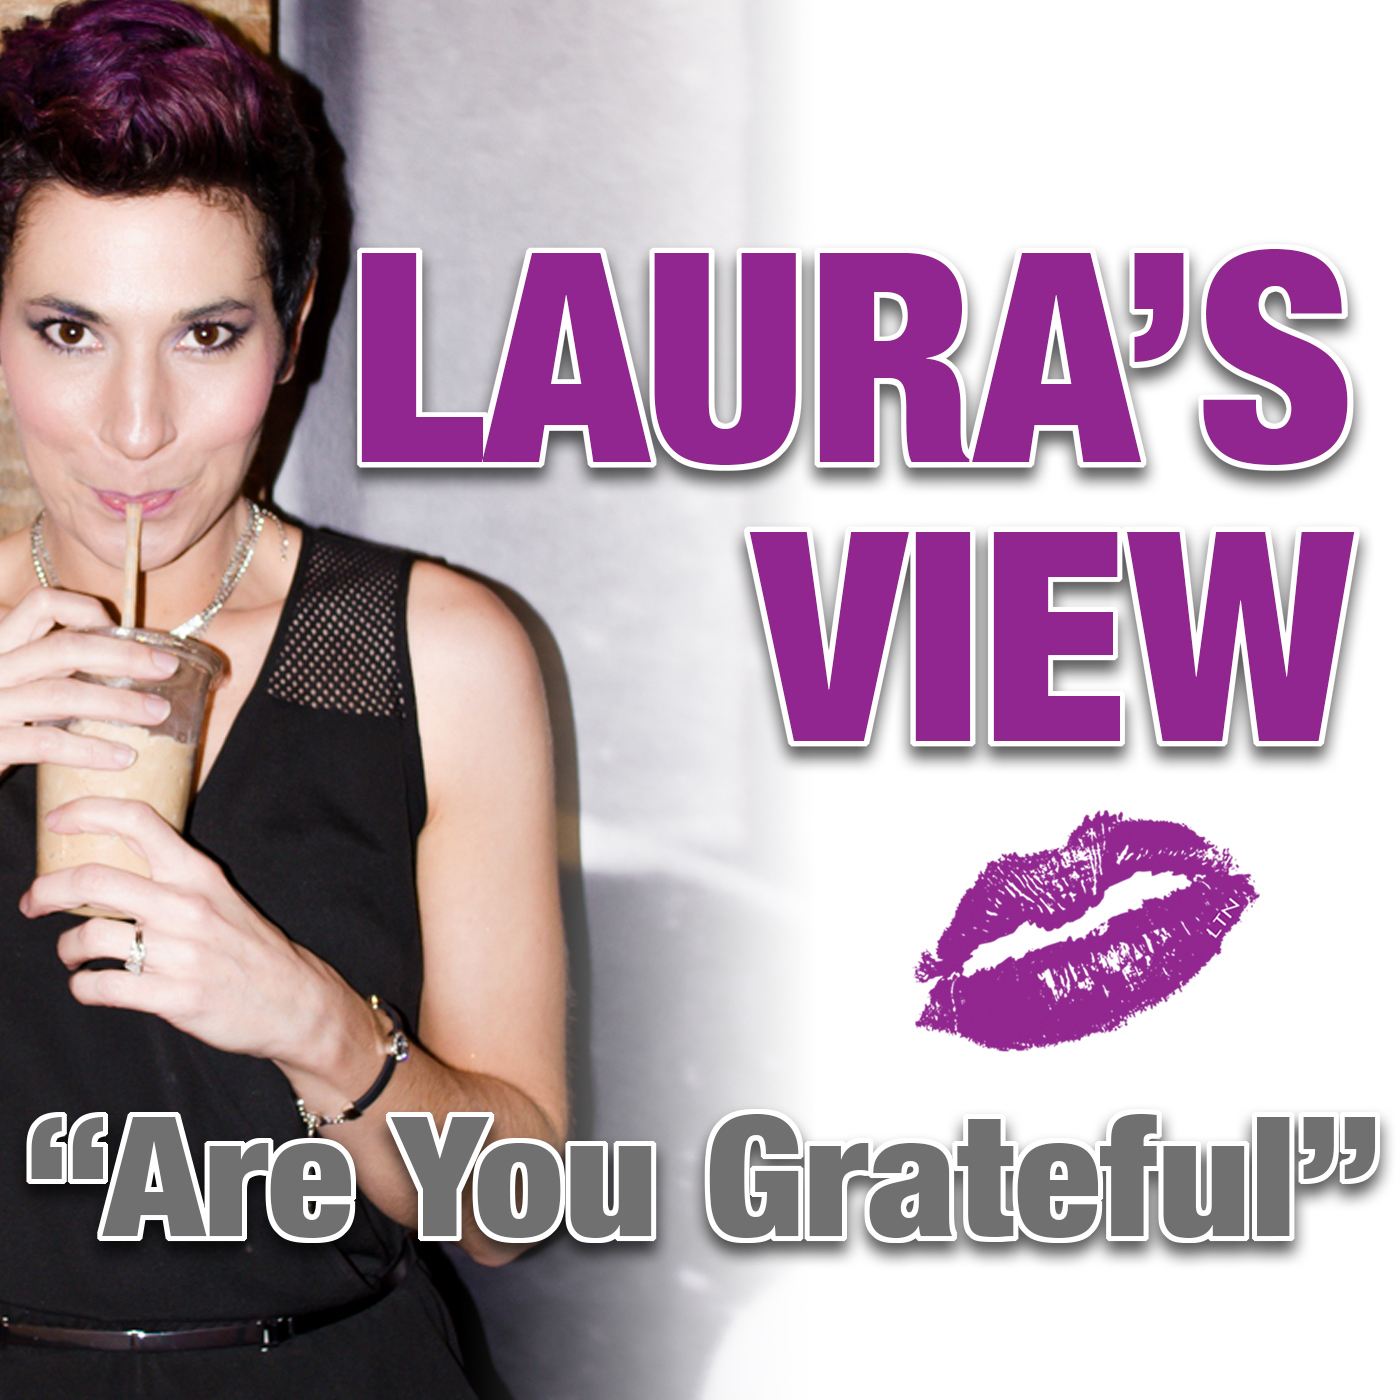 LIP 027: Are You Grateful? with Laura Spragg